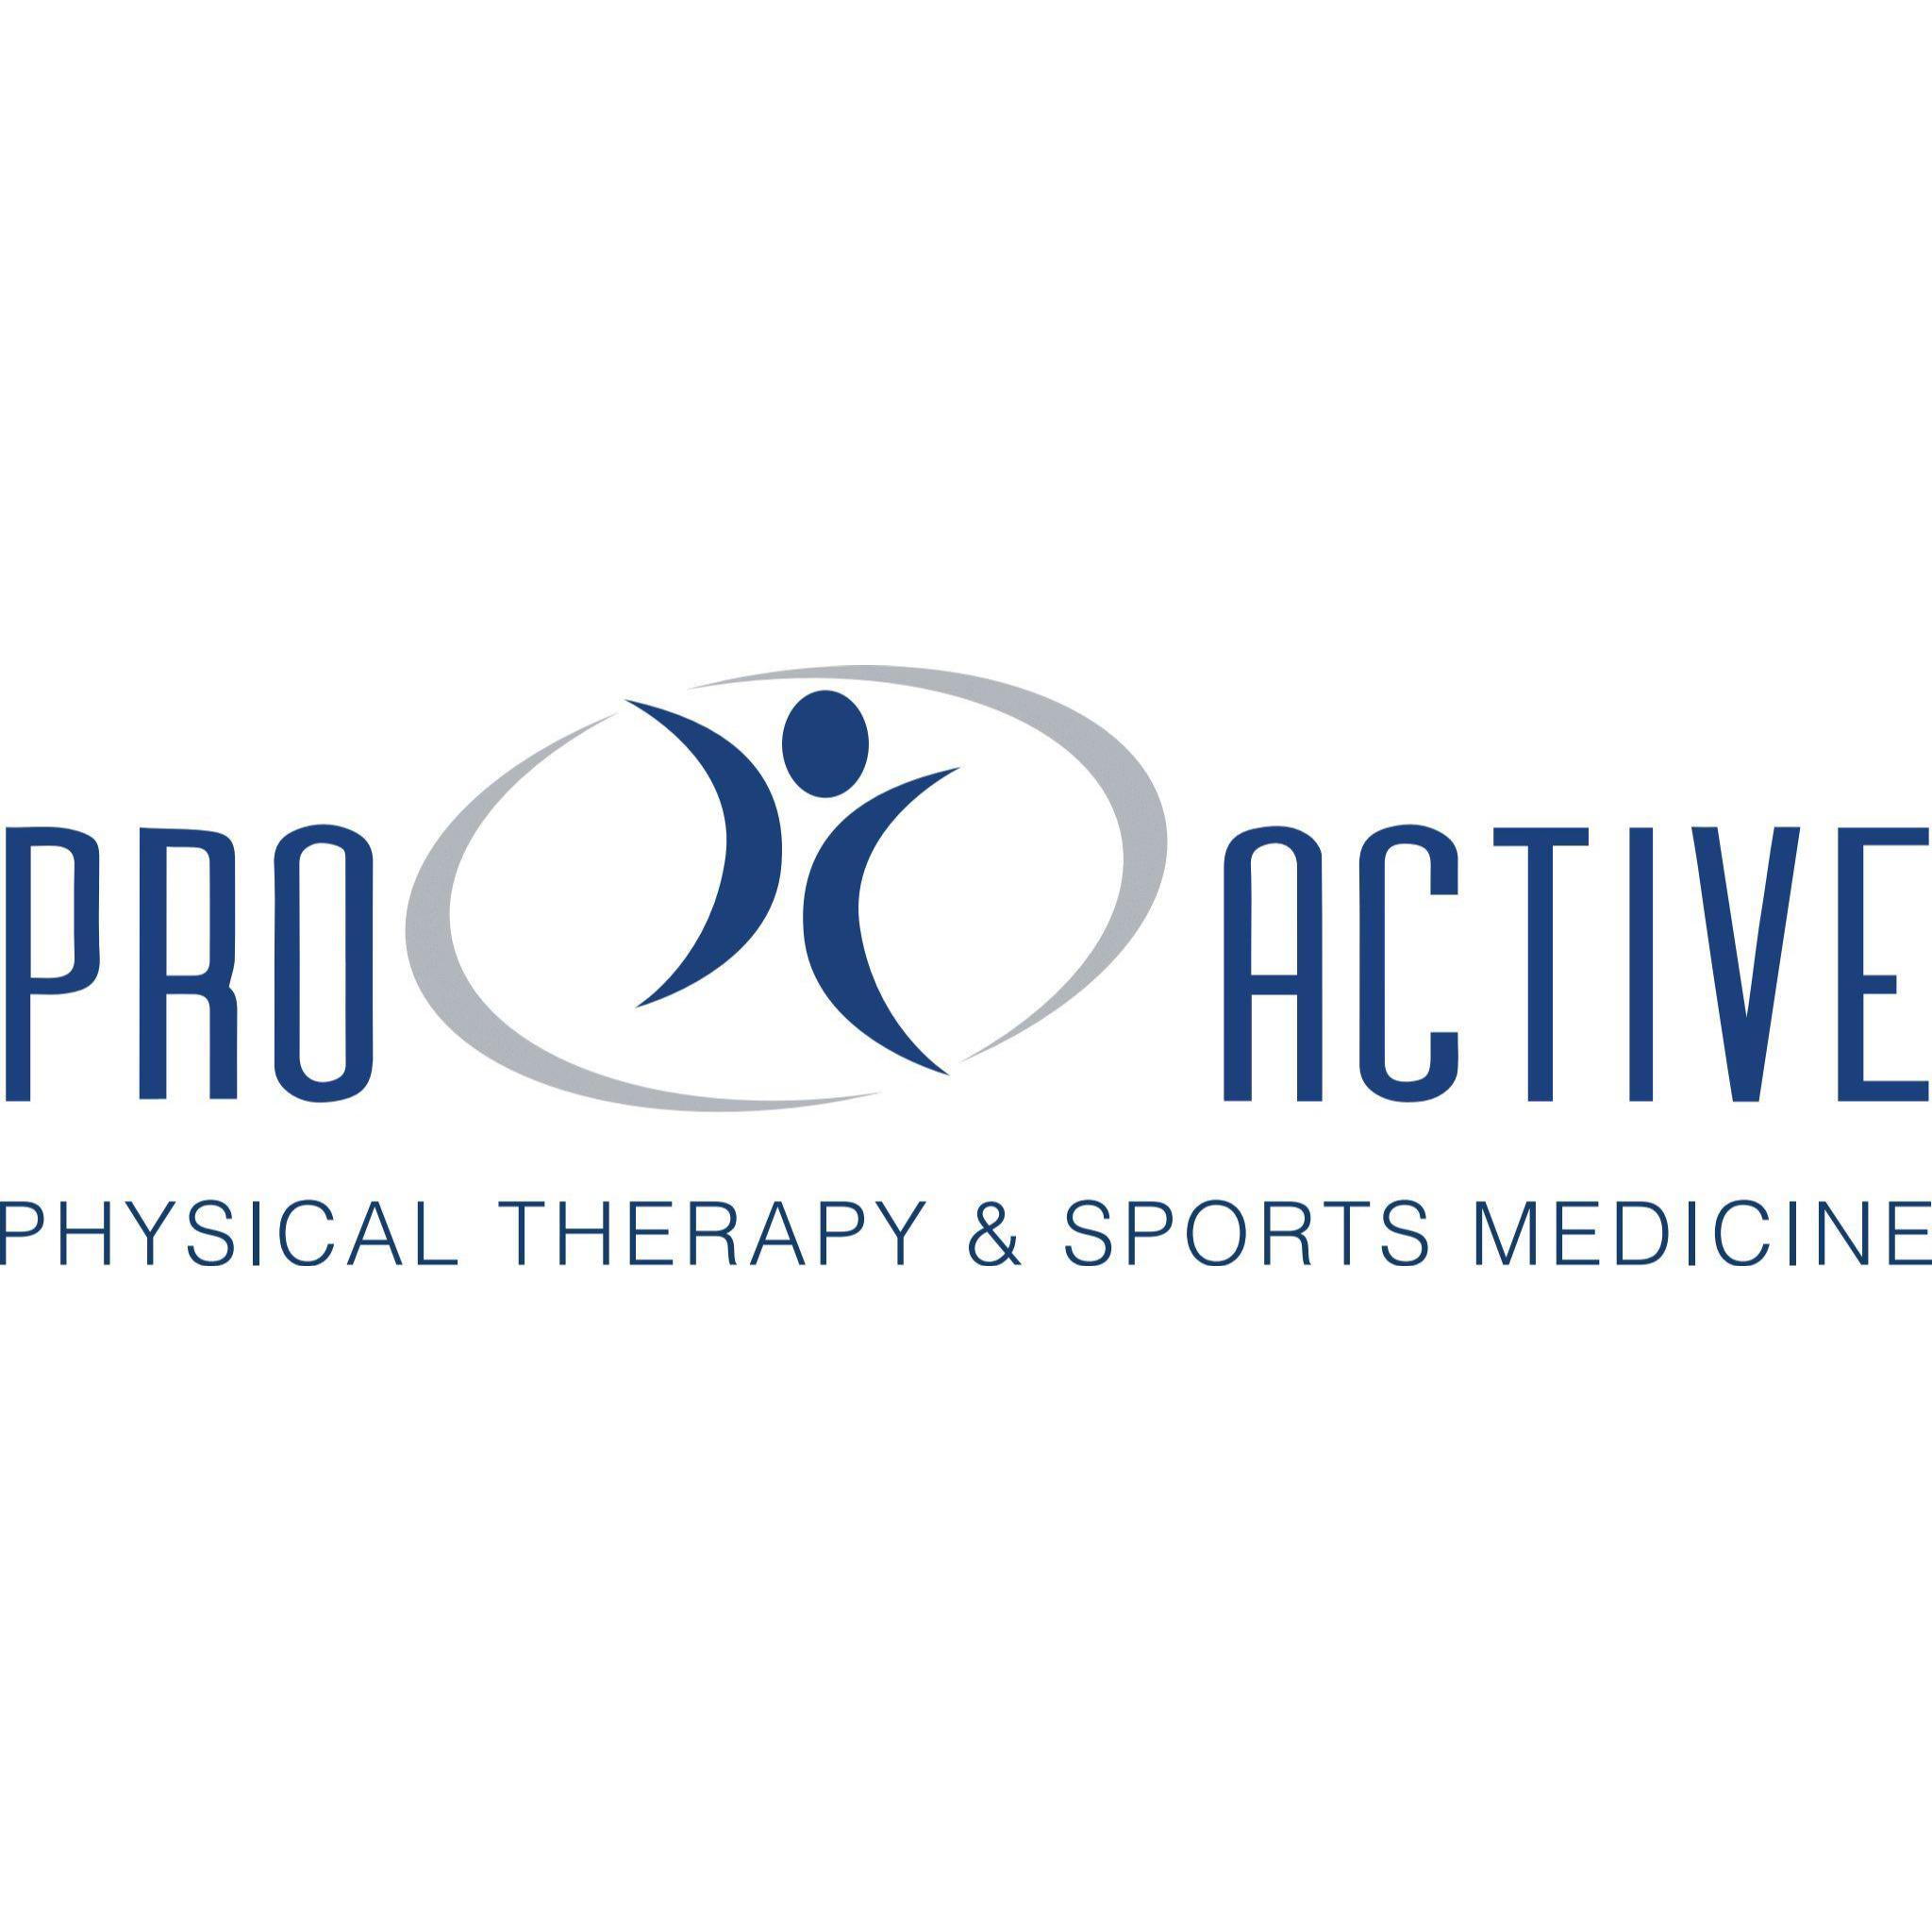 Pro Active Physical Therapy and Sports Medicine - Lakewood - Lakewood, CO 80226 - (303)274-2404 | ShowMeLocal.com